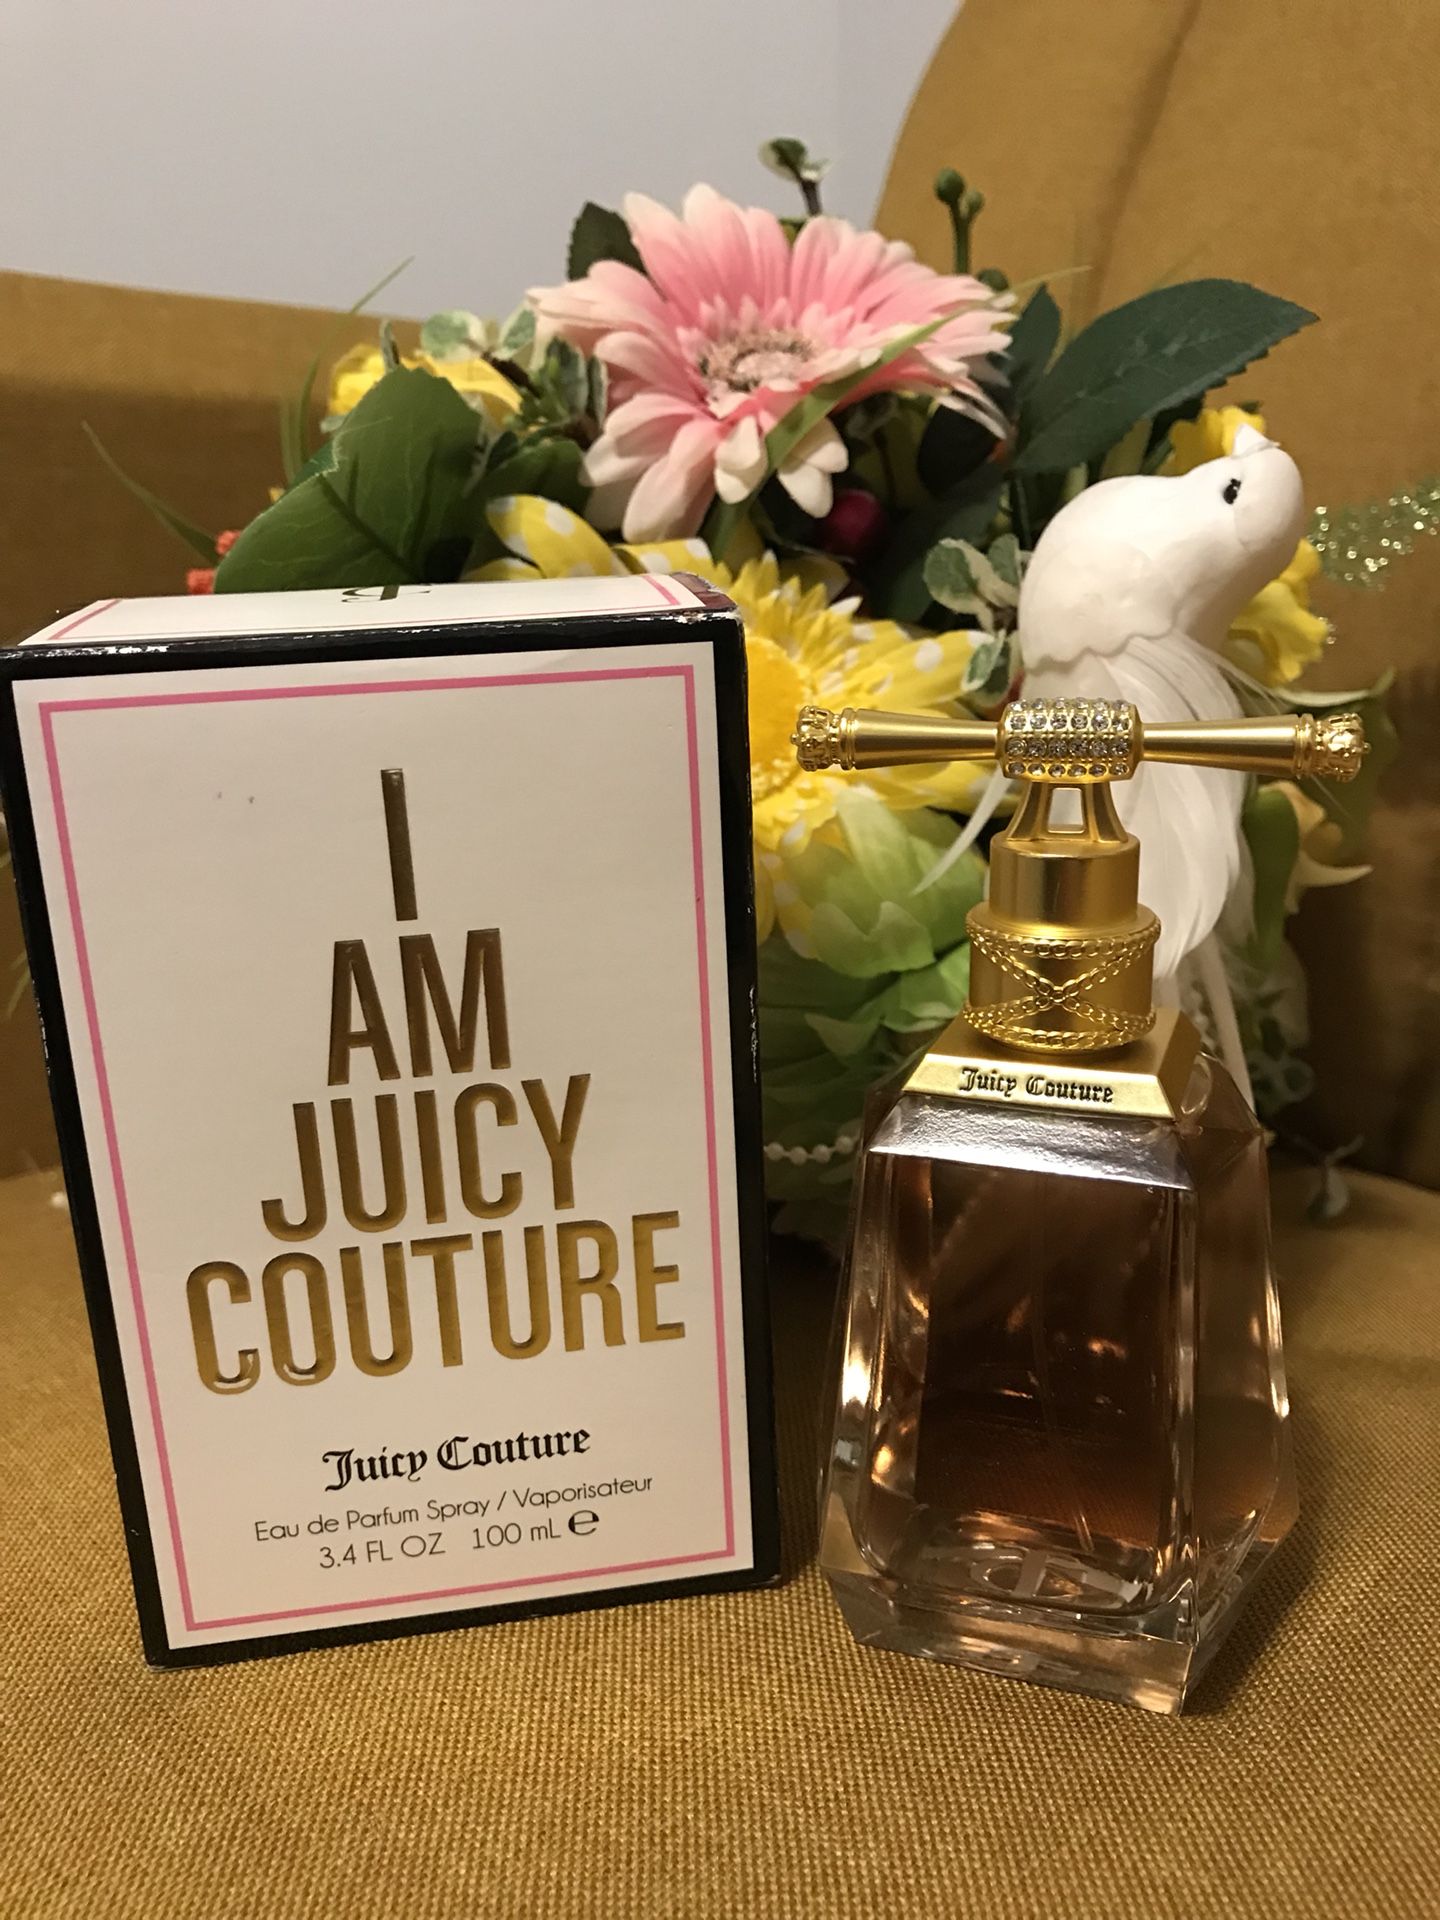 New juicy Couture woman’s perfume